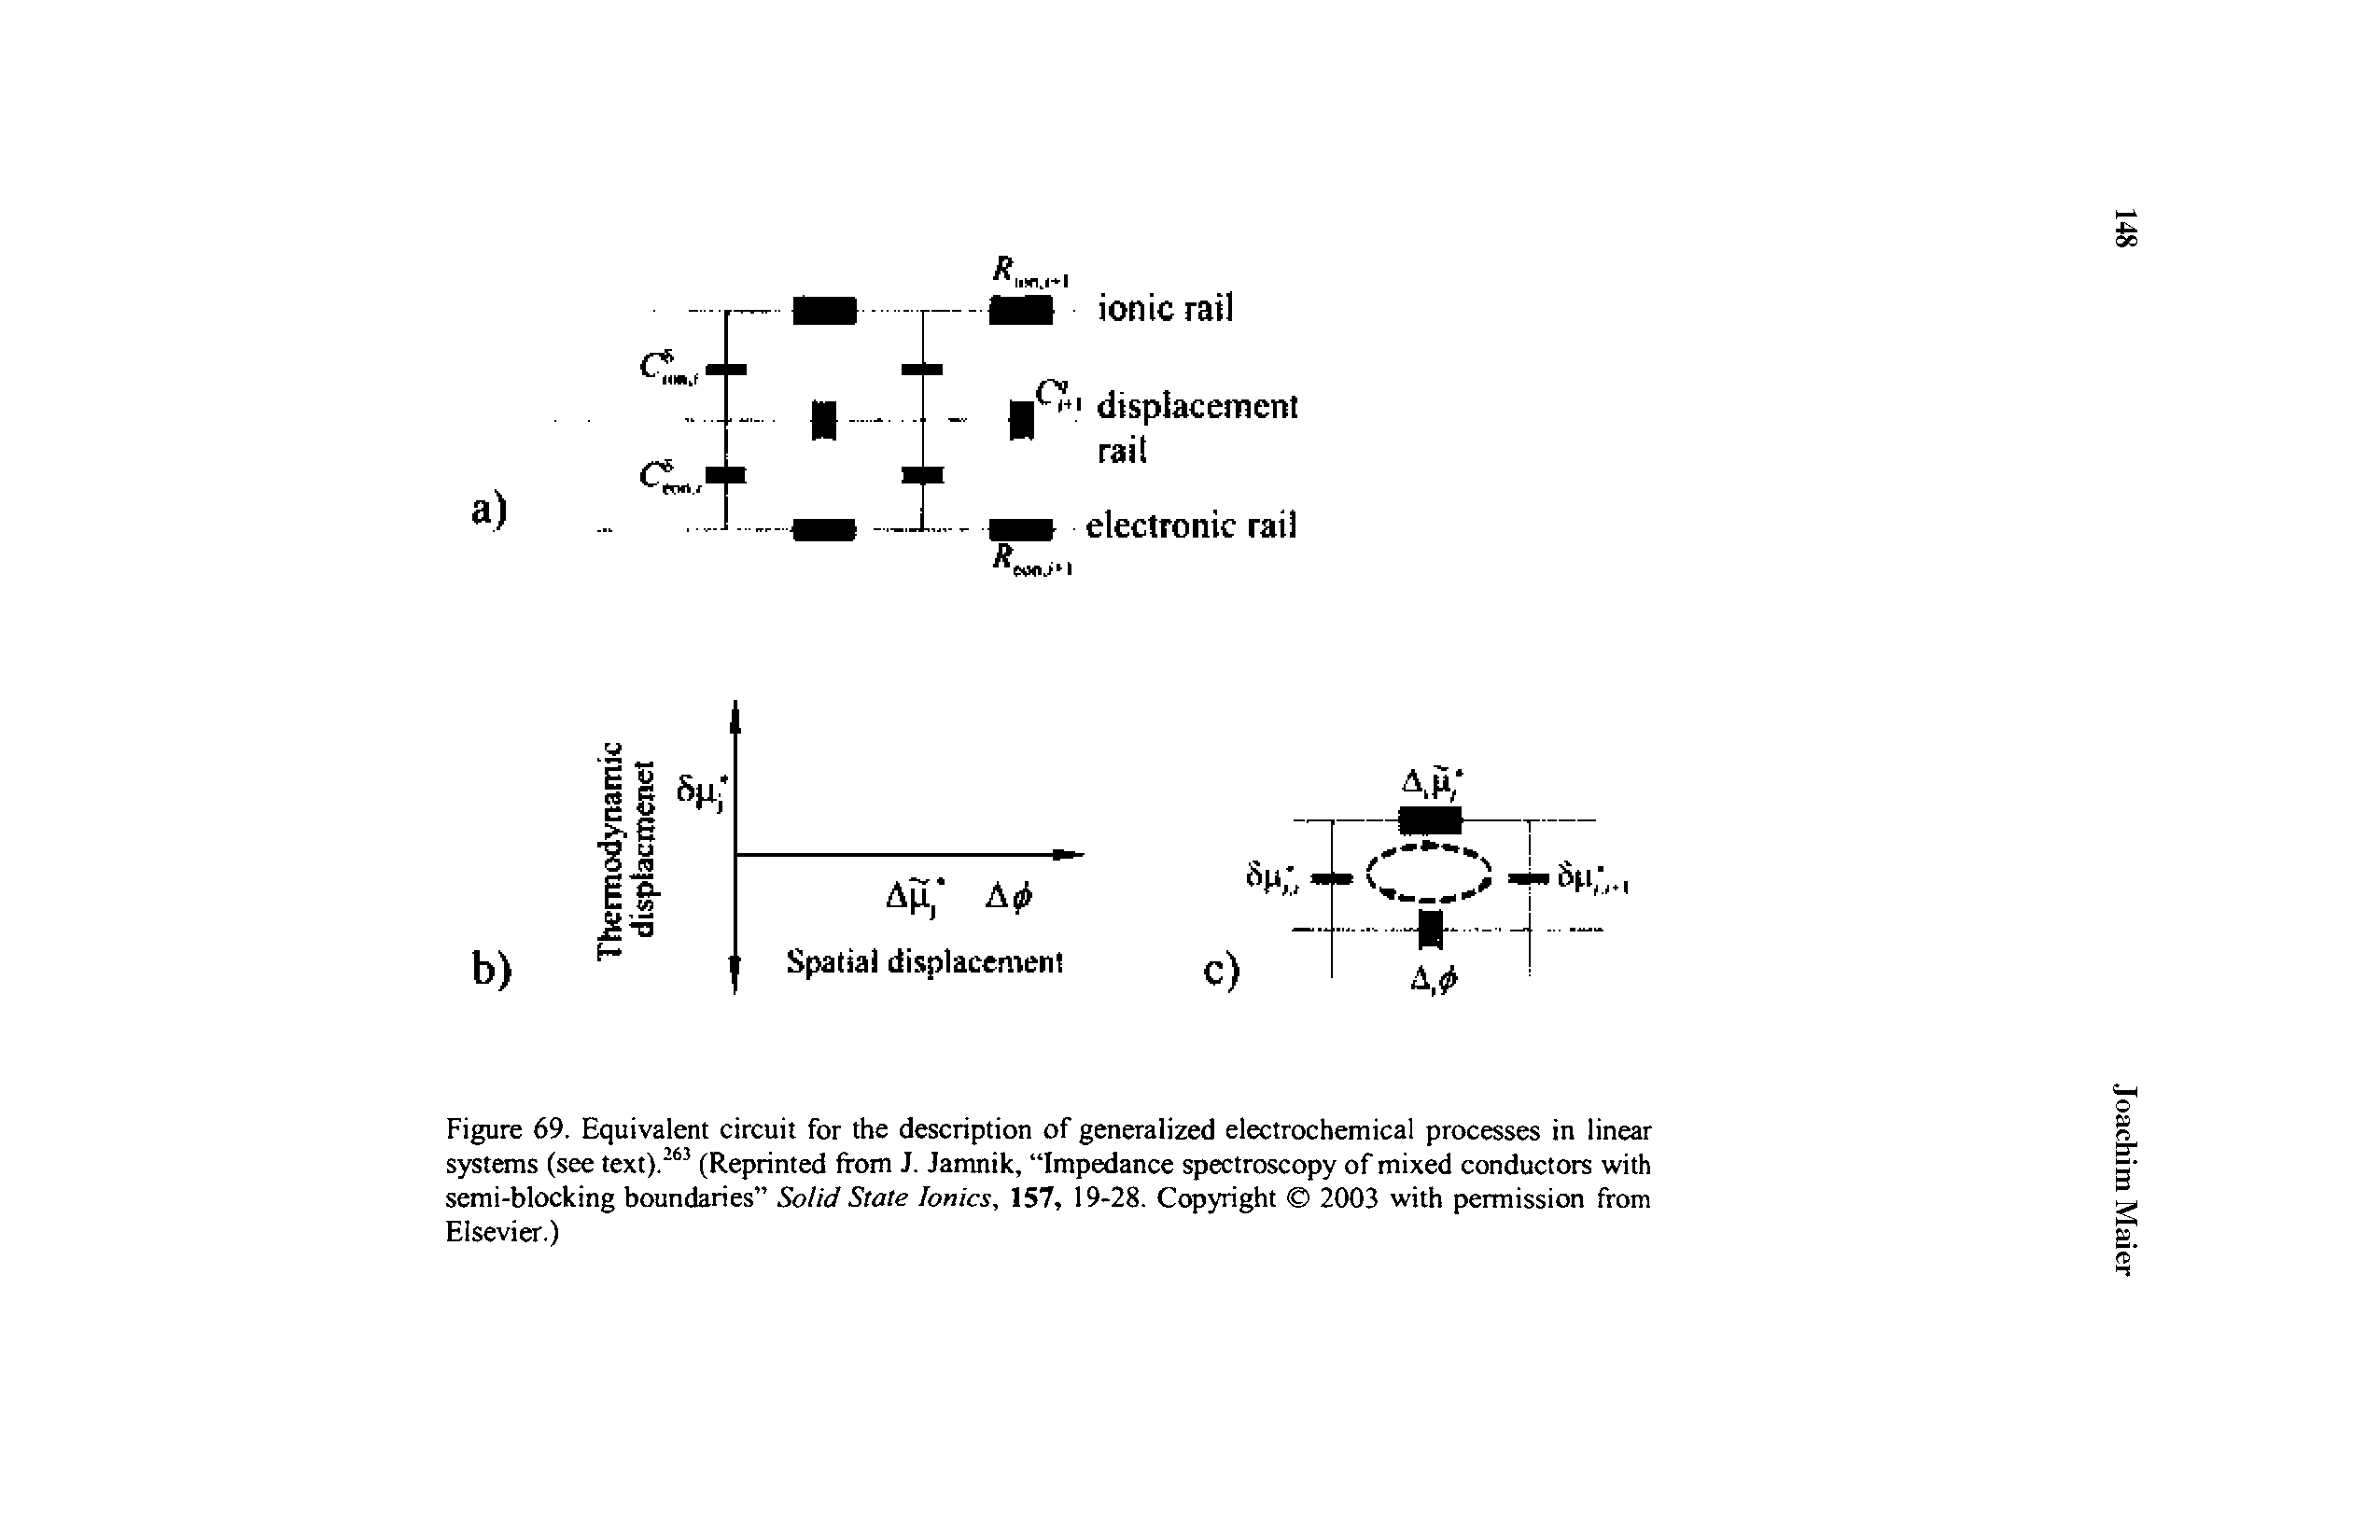 Figure 69. Equivalent circuit for the description of generalized electrochemical processes in linear systems (see text).263 (Reprinted from J. Jamnik, Impedance spectroscopy of mixed conductors with semi-blocking boundaries Solid State Ionics, 157, 19-28. Copyright 2003 with permission from Elsevier.)...